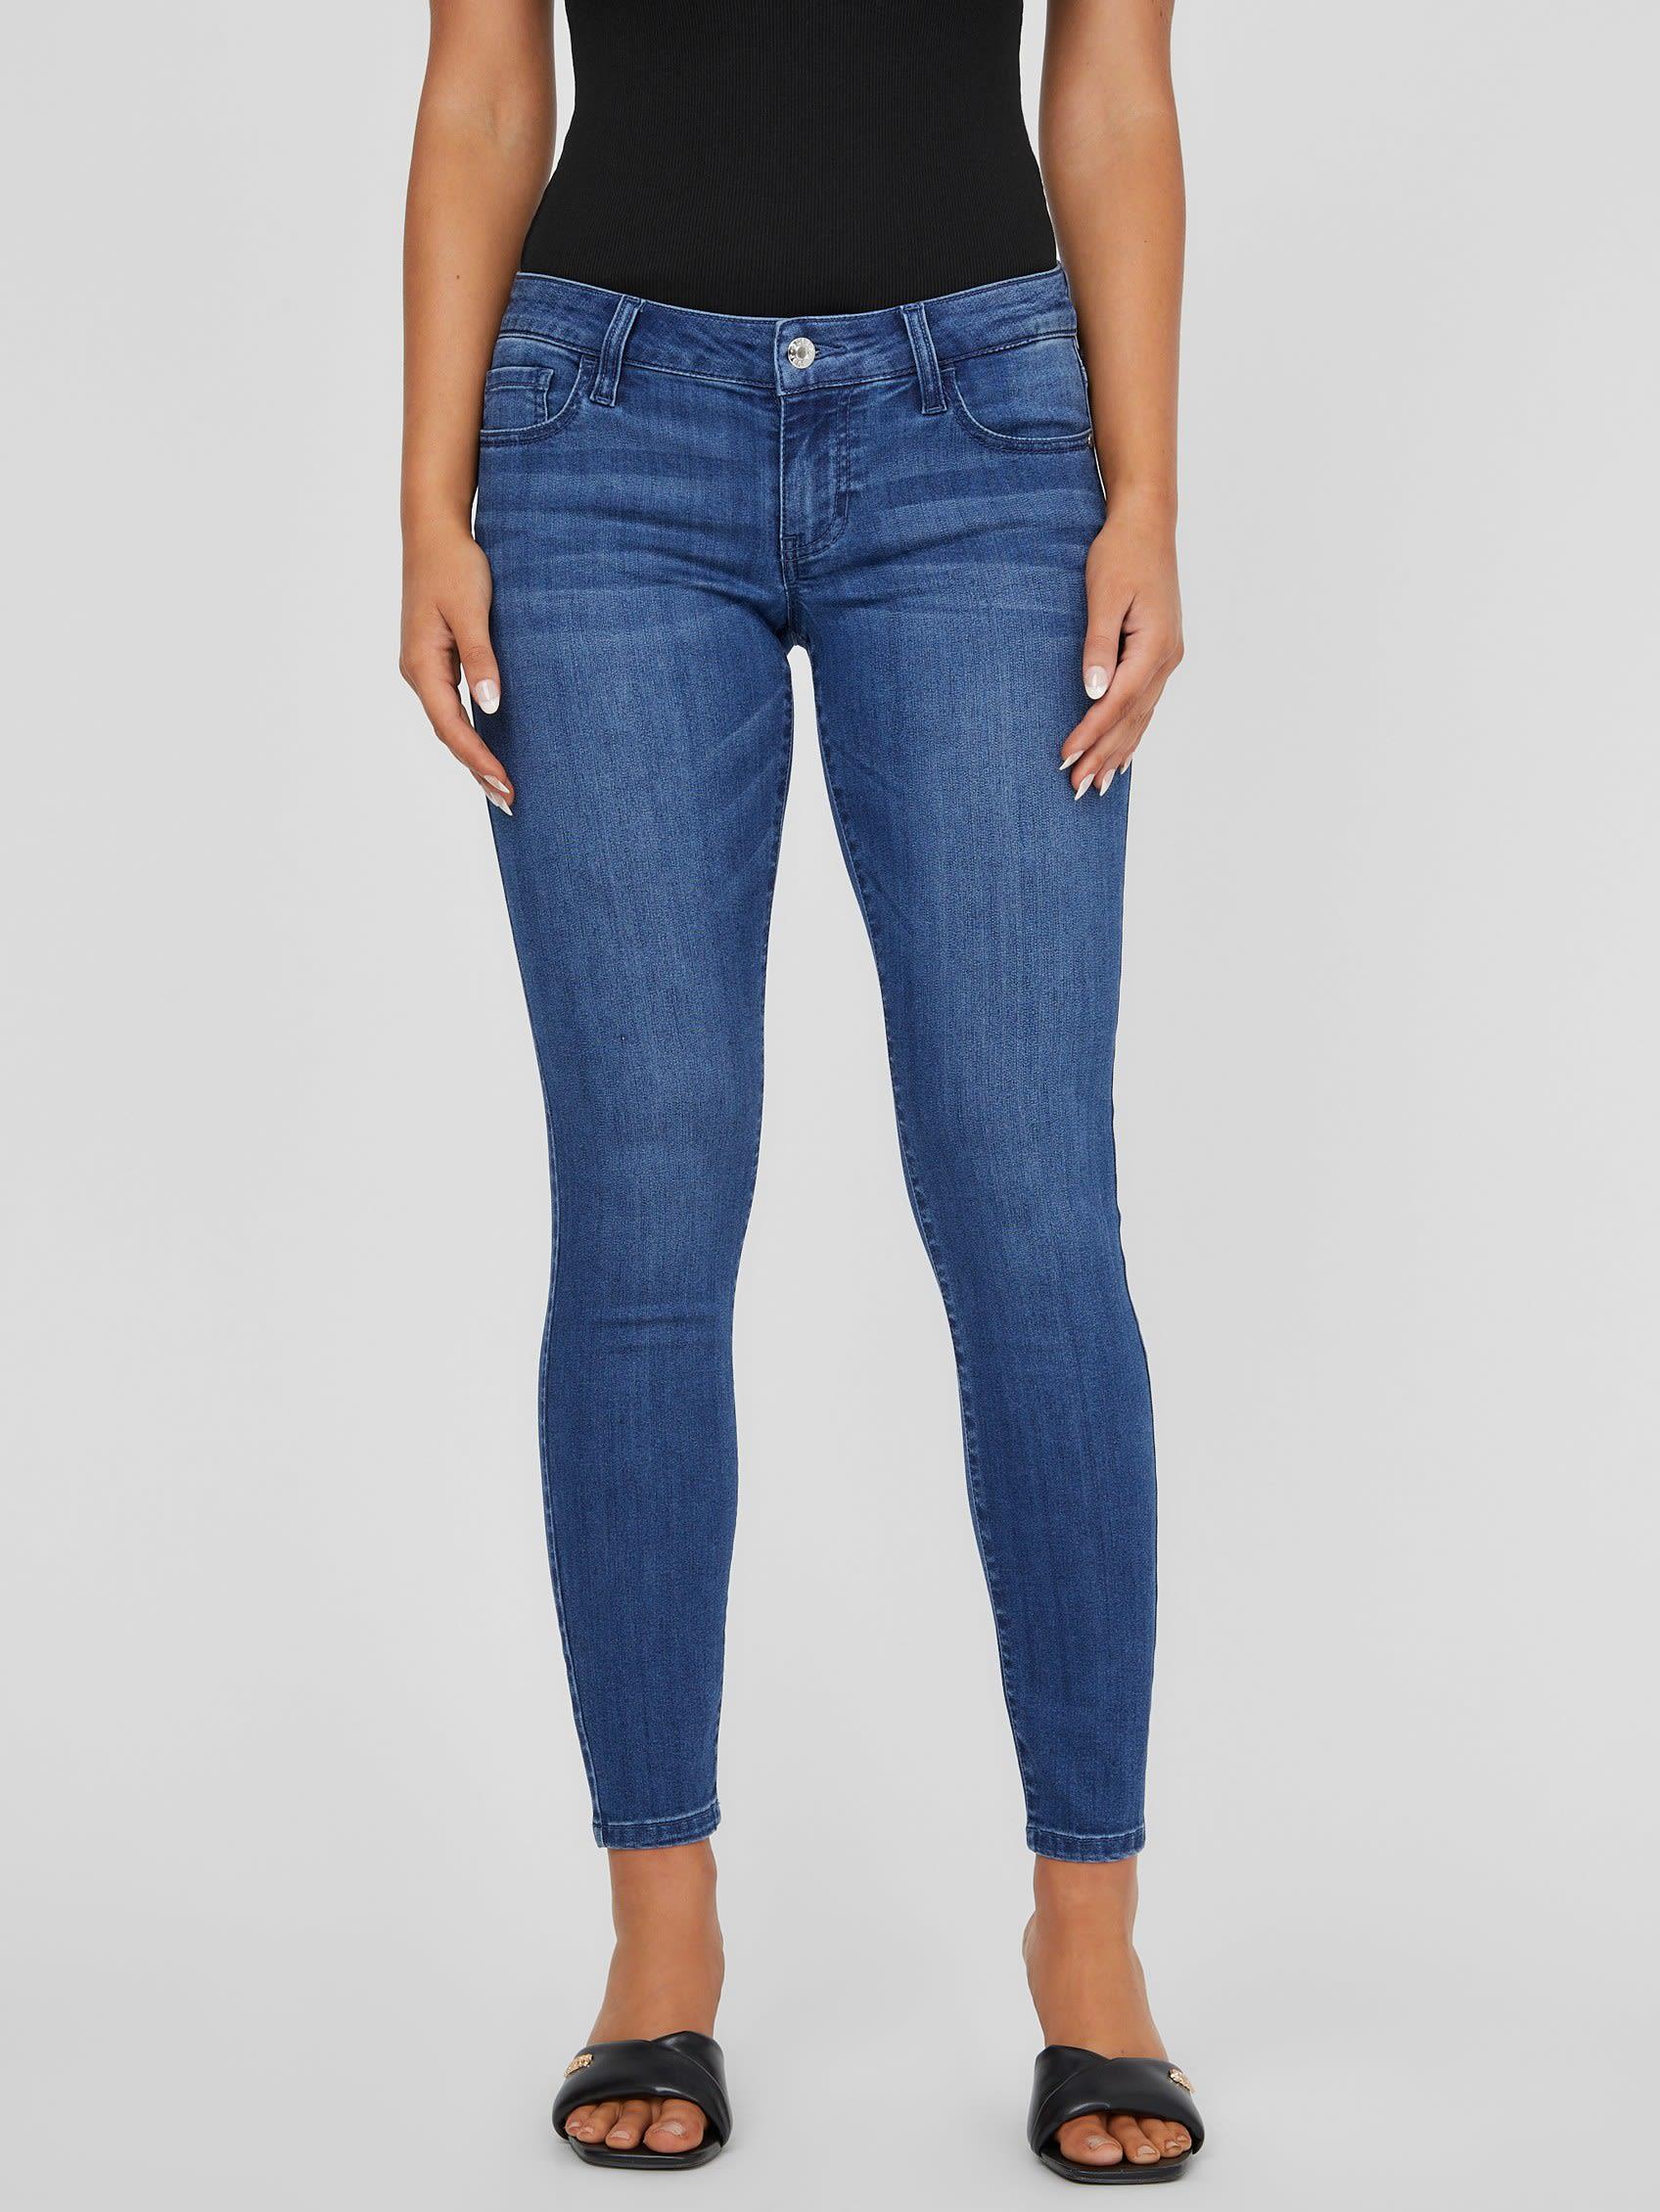 Guess Factory Eco Brittney Low-rise Skinny Jeans in Blue | Lyst